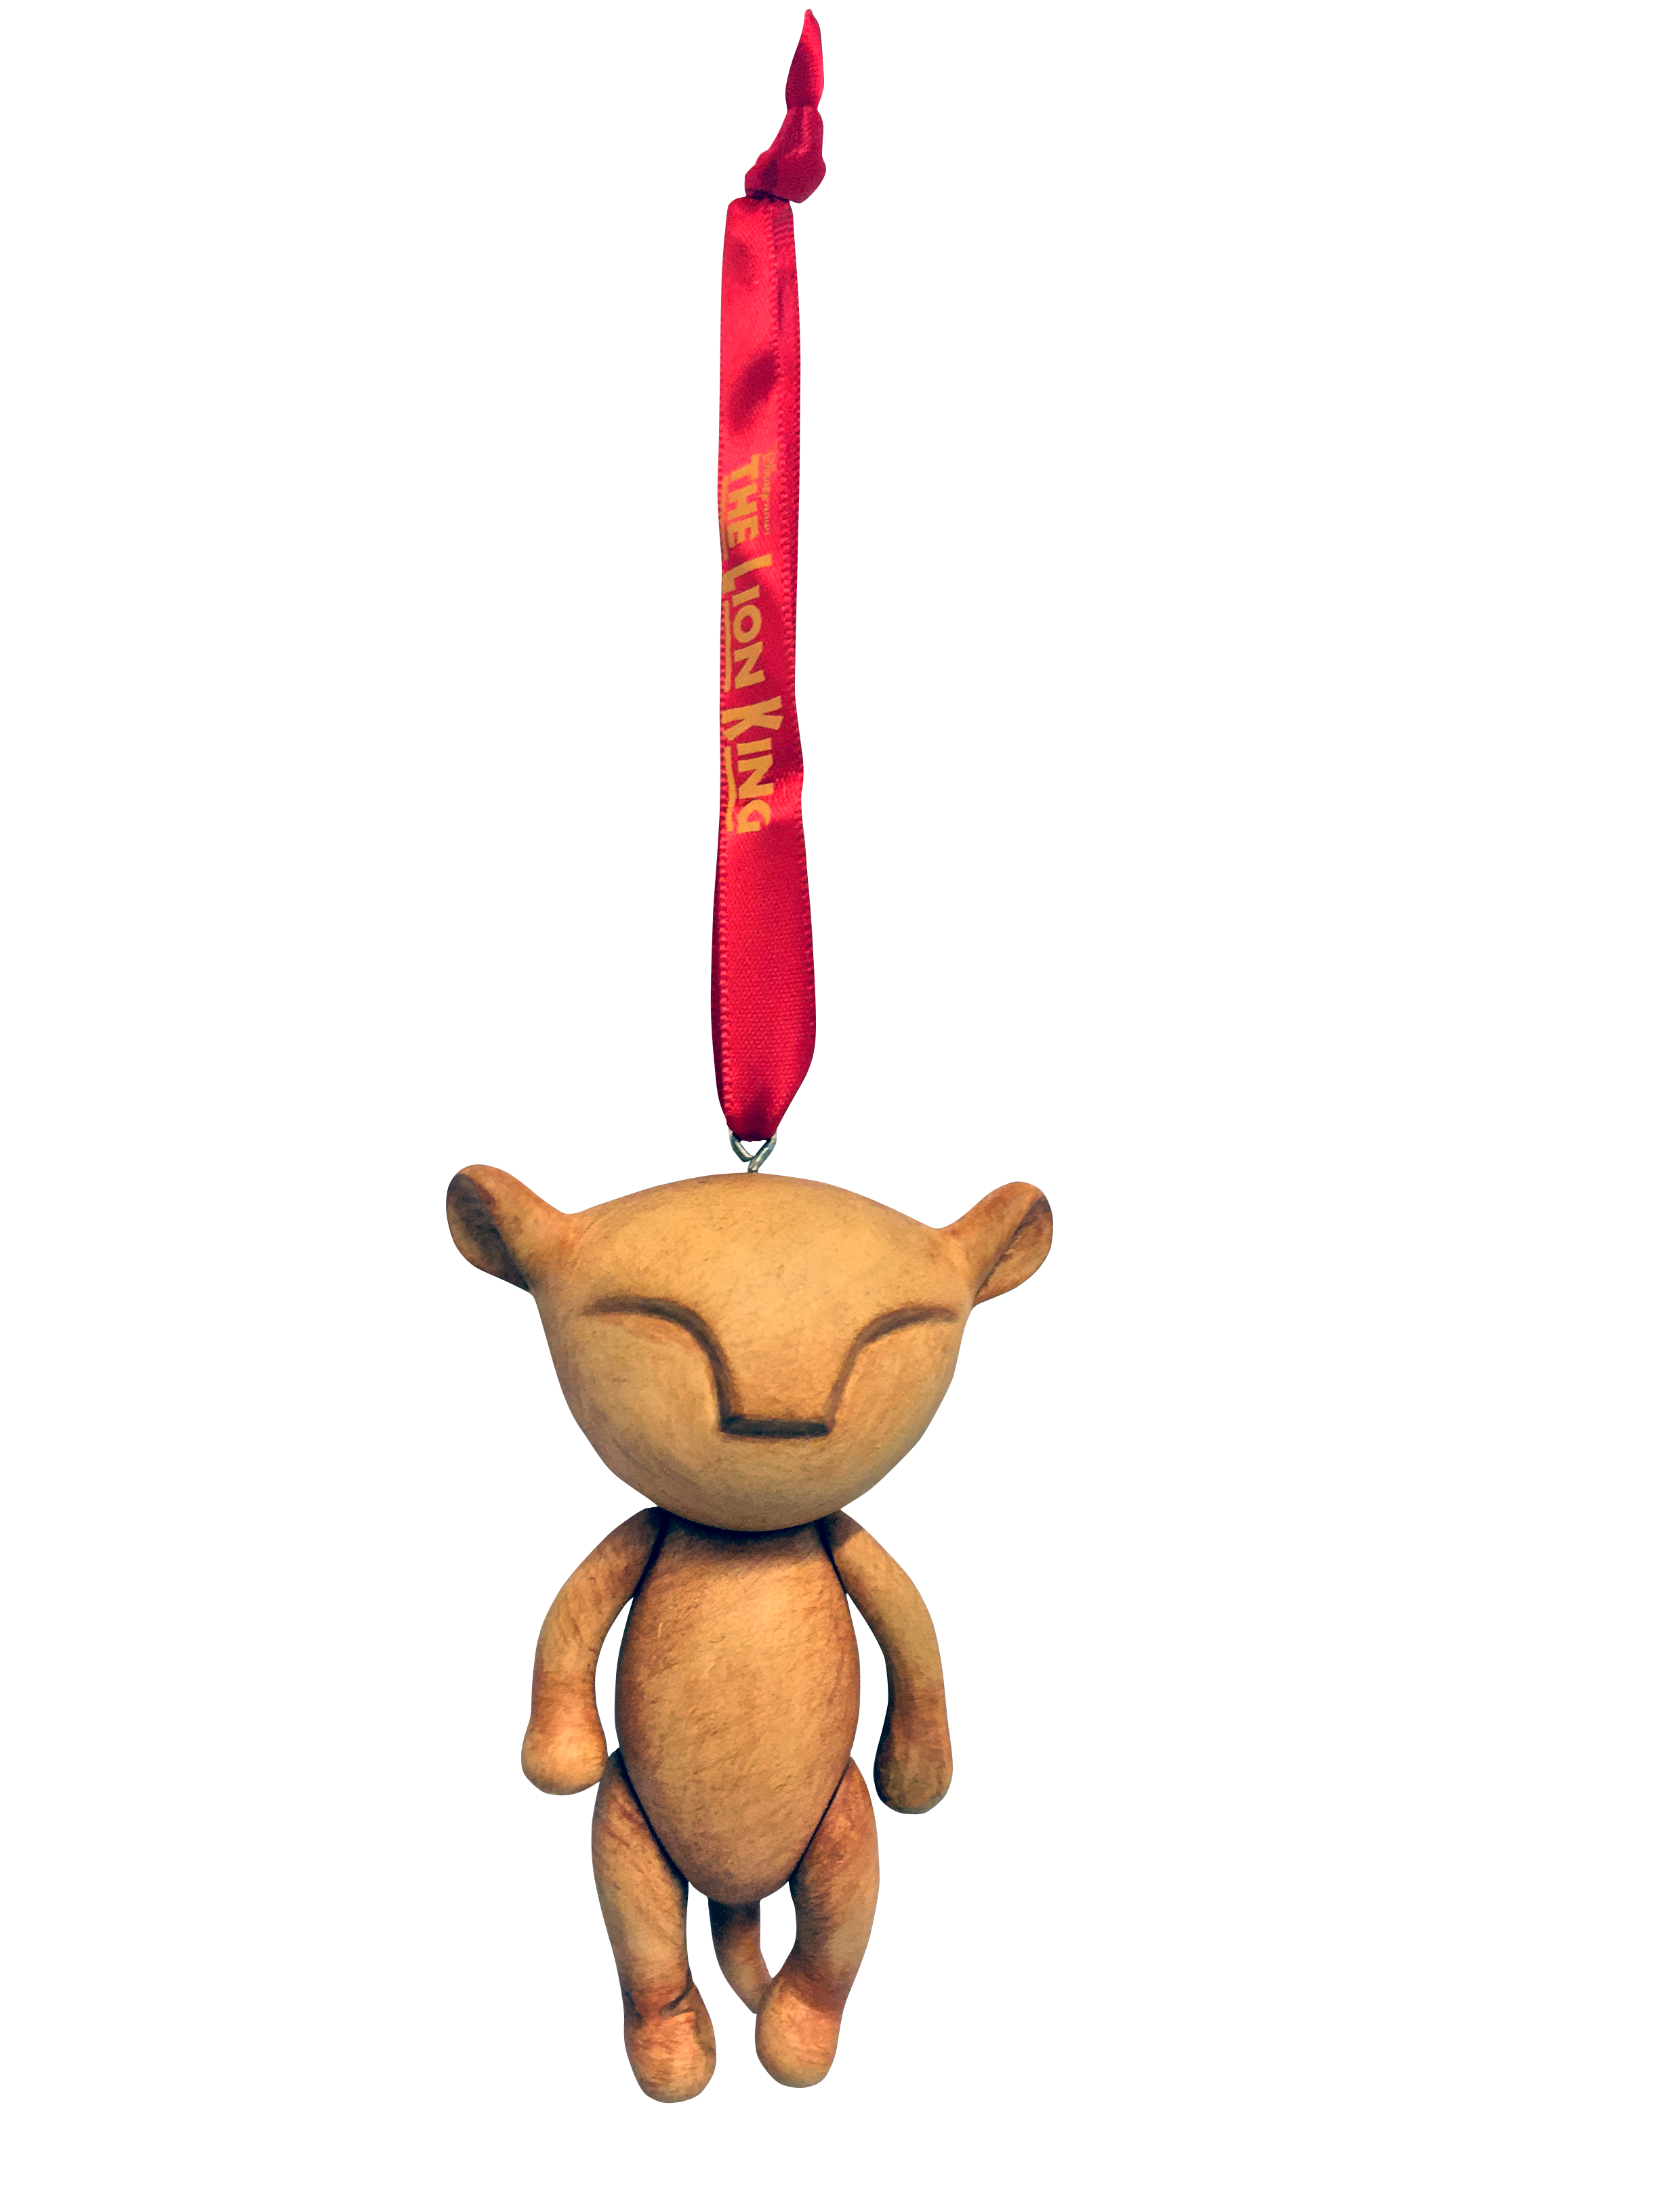 Lion King The Broadway Musical Baby Simba Ornament